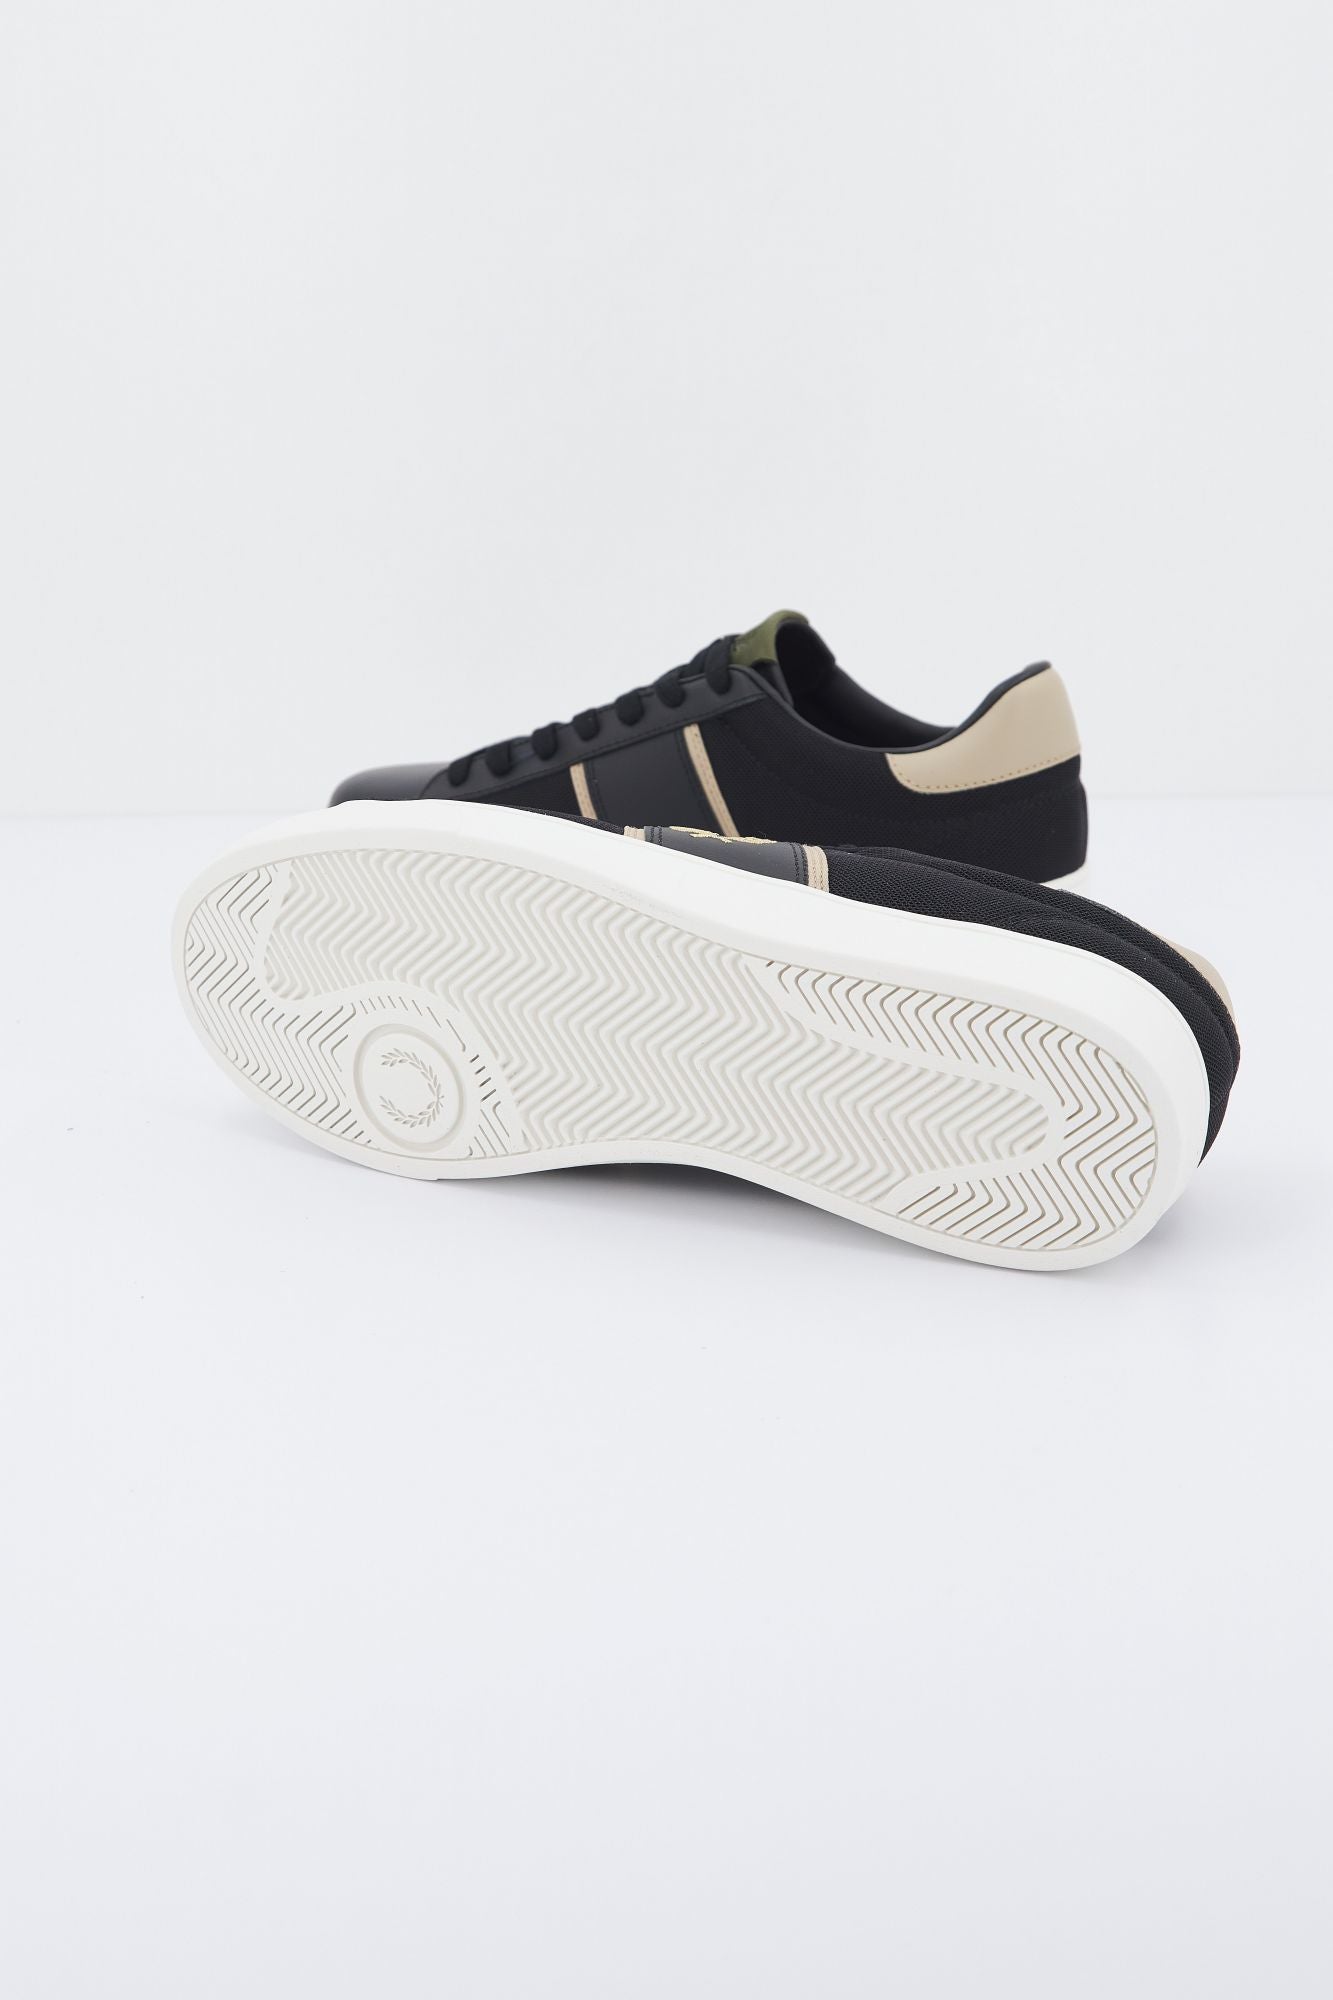 FRED PERRY B3302 en color NEGRO (4)